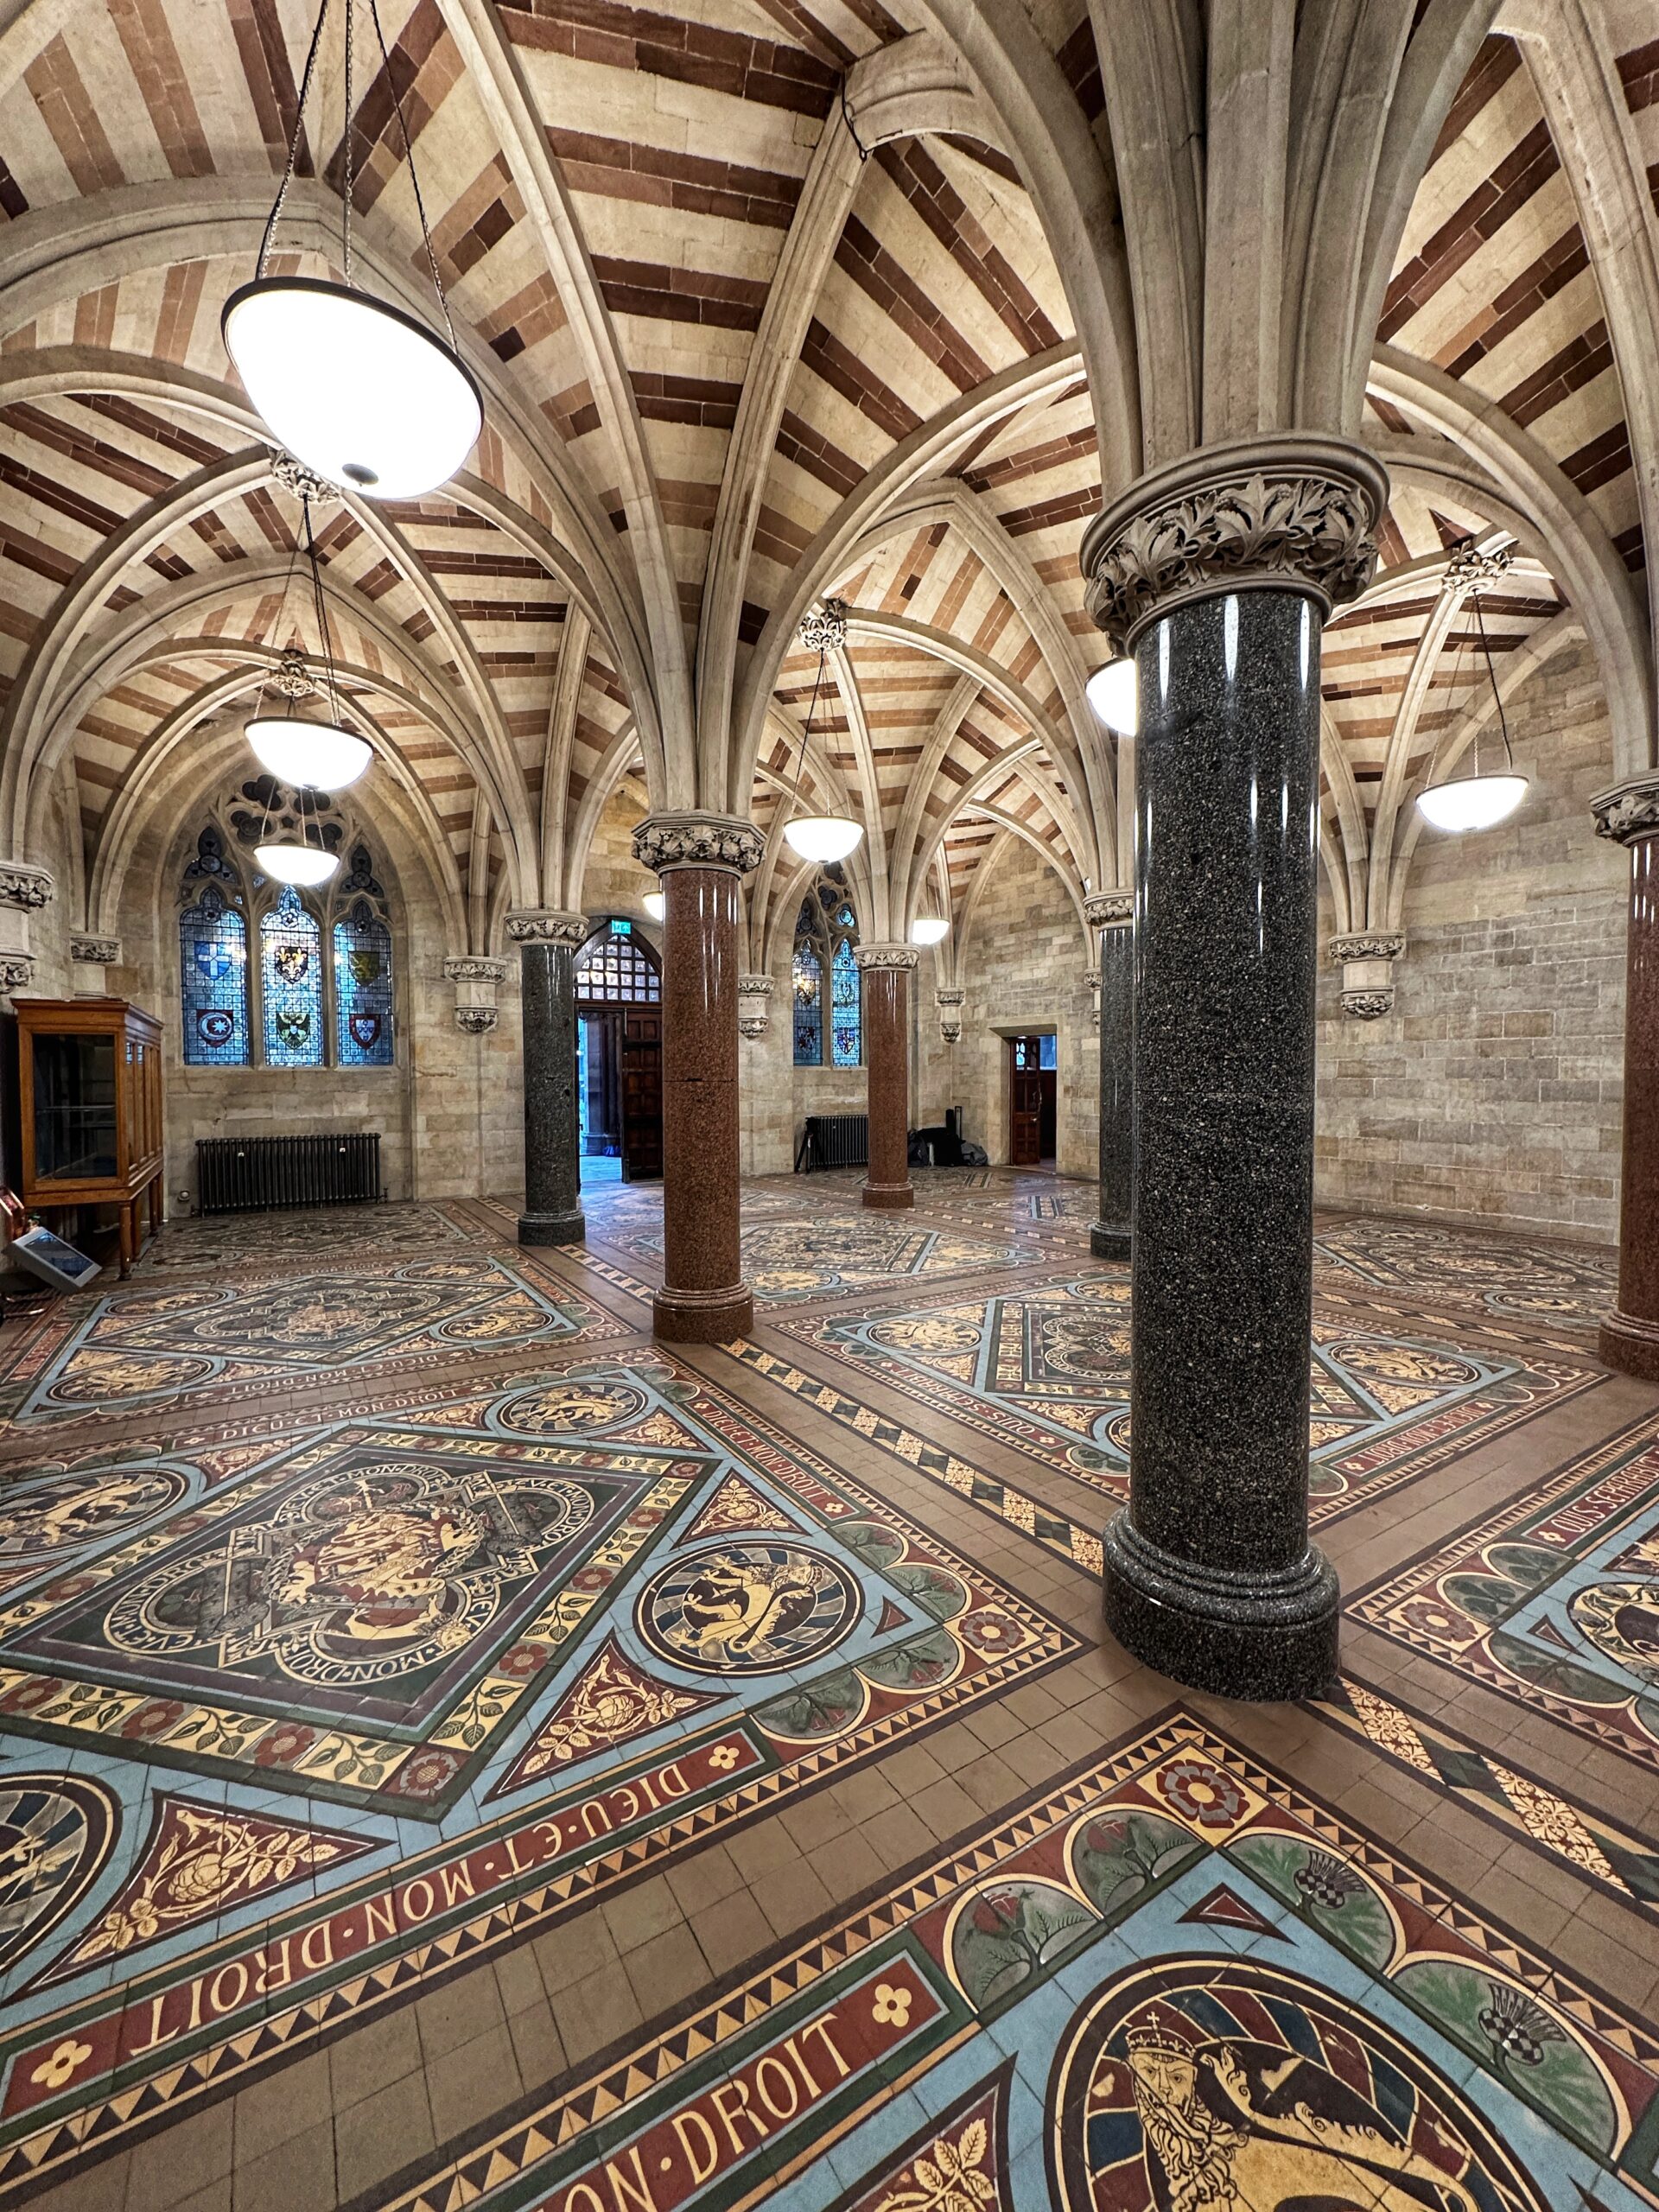 The Exchange at Rochdale Town Hall will be used as the main entrance hall. Credit: The Manc Group